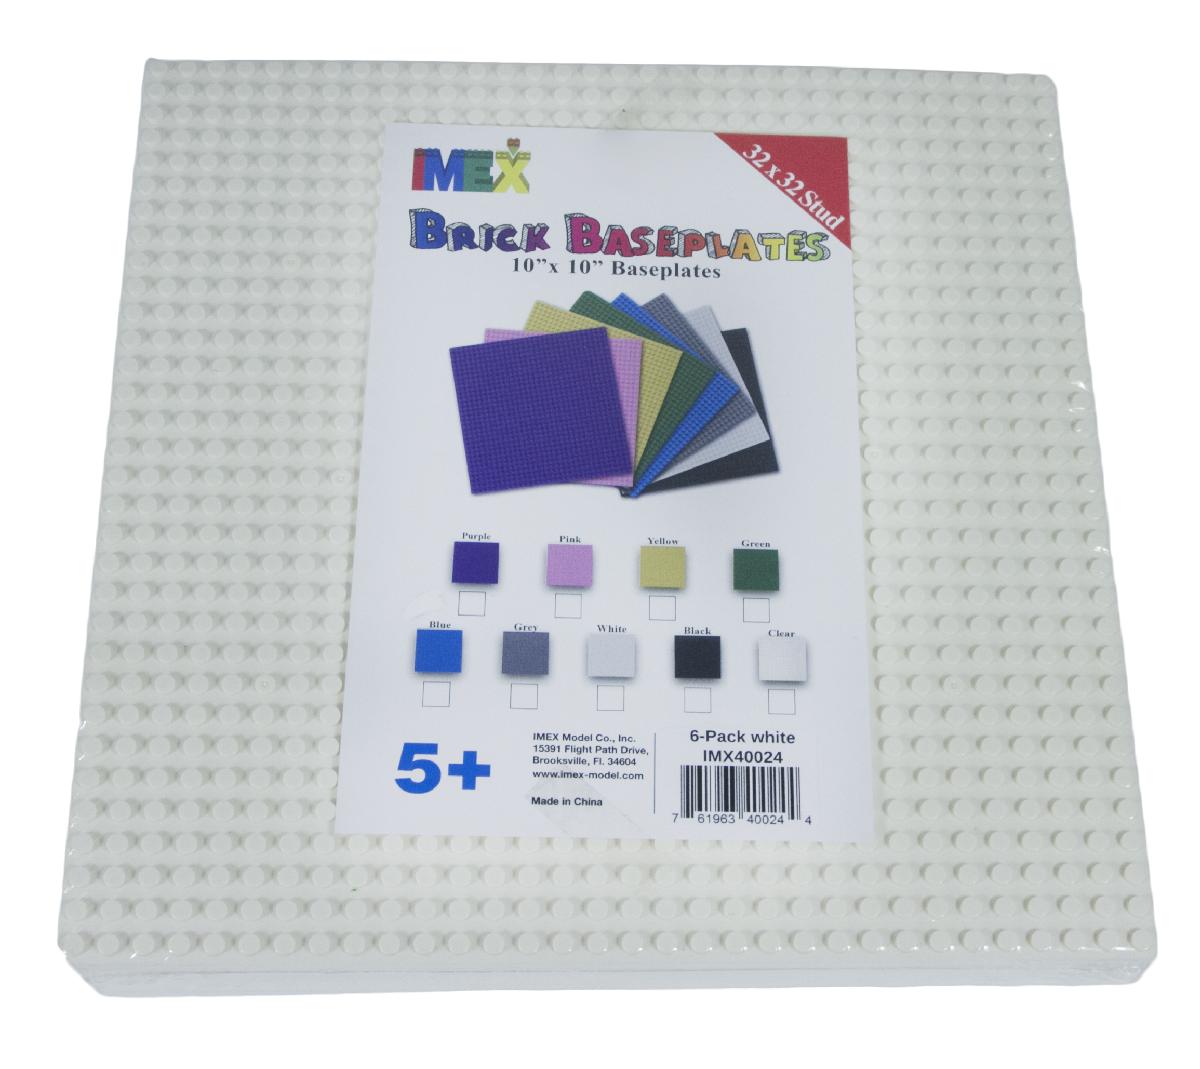 32 STUD X 32 STUD WHITE COMPATIBLE BASEPLATES, 6PACK